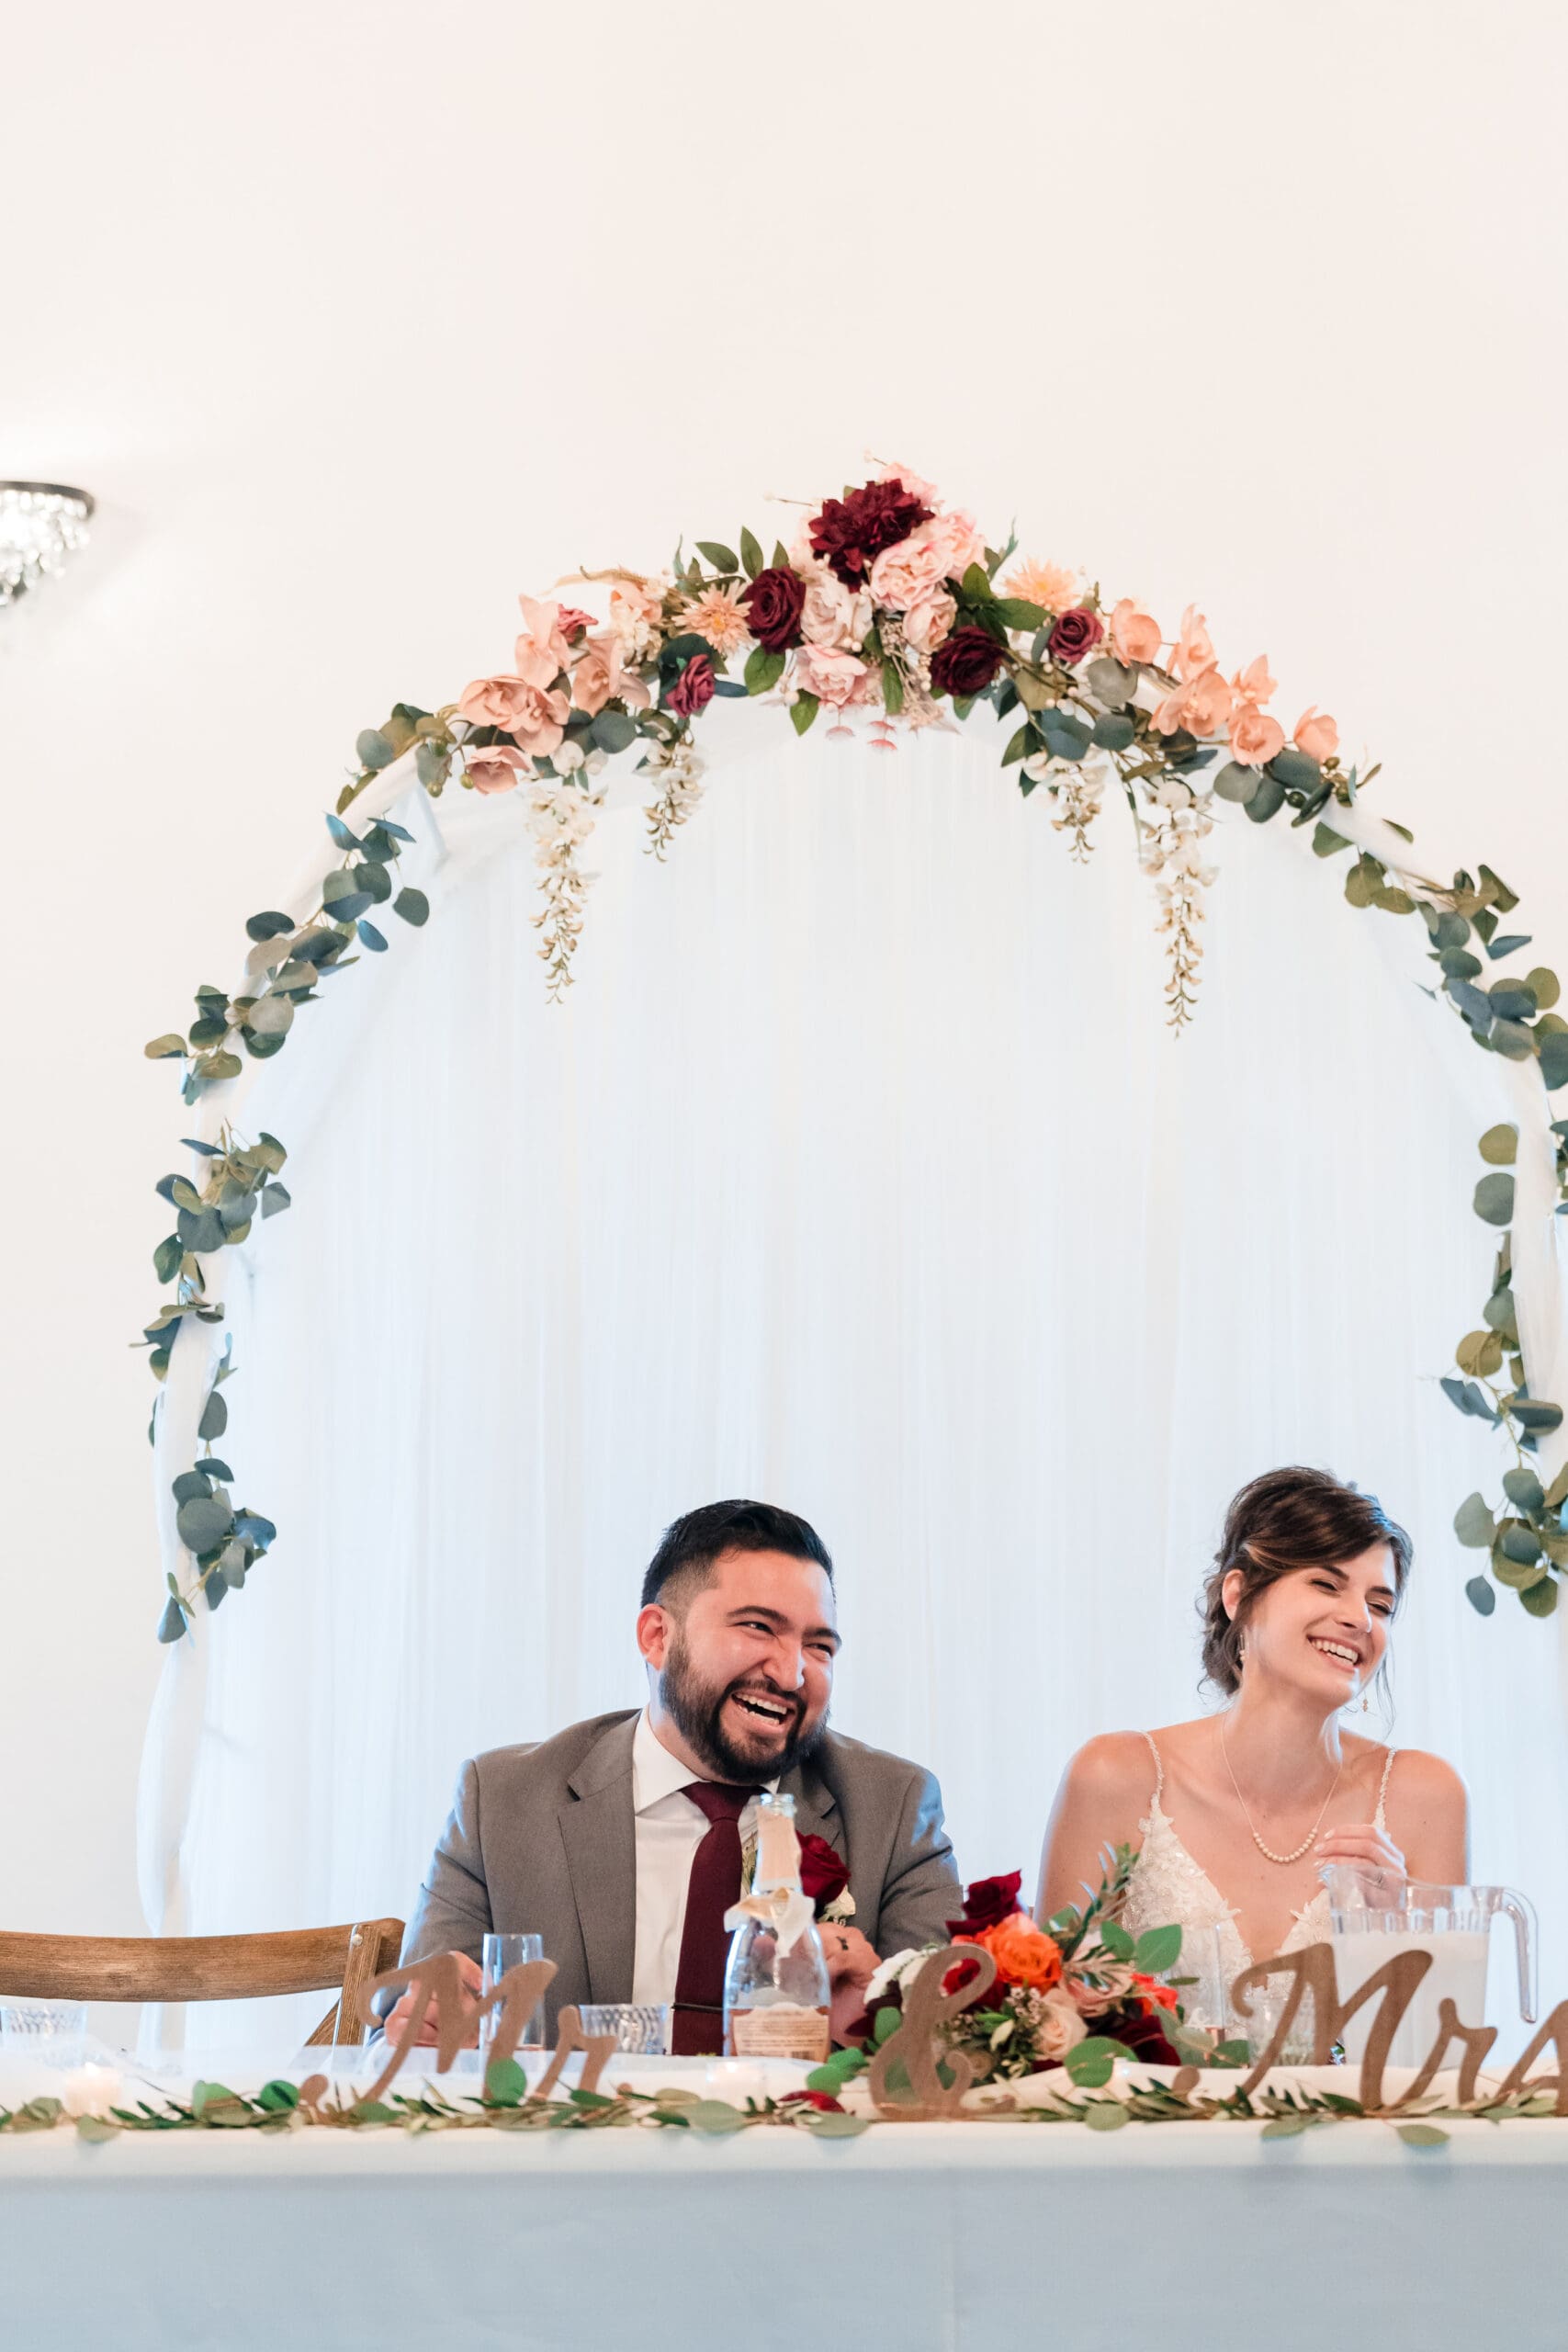 A tall shot capturing the newlyweds seated at the table on the stage, adorned with "Mr & Mrs" decorations, both beaming with joy during the reception at the Sterling Event Venue Reception Center.